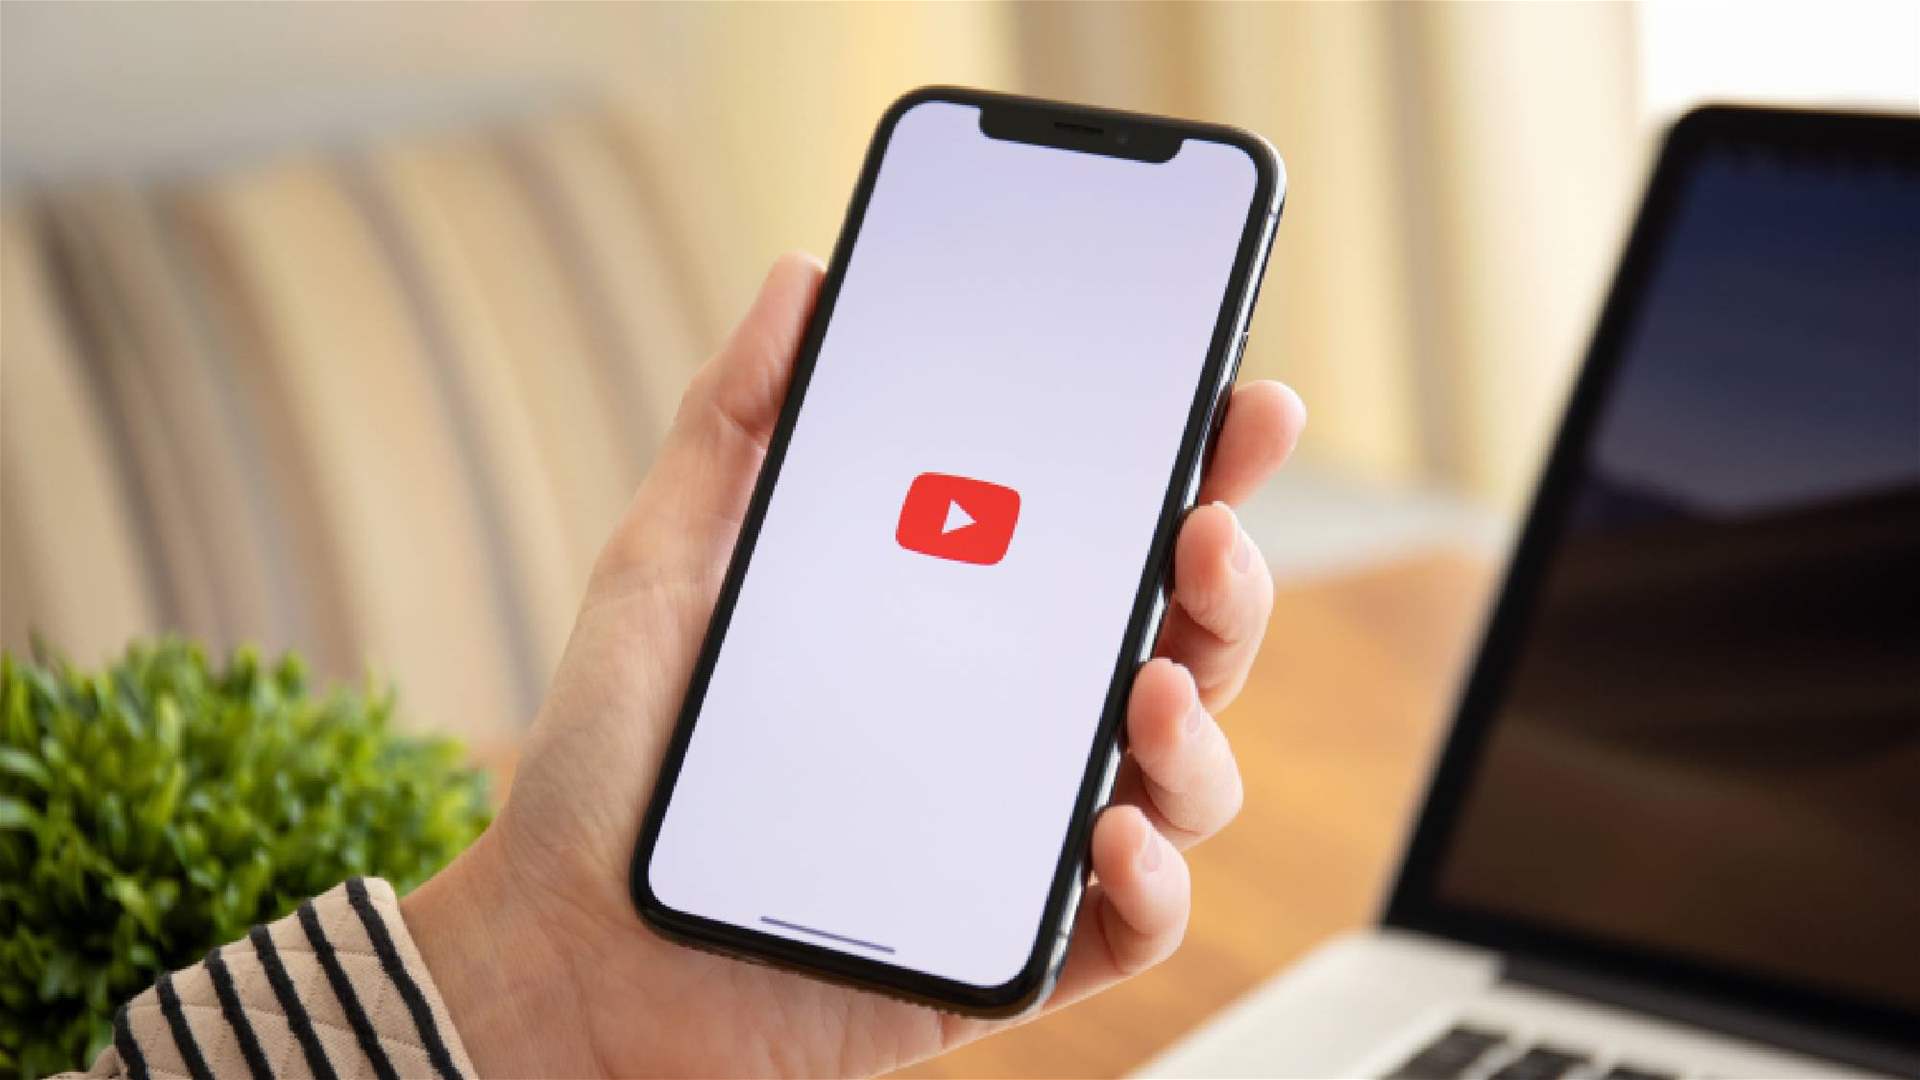 YouTube's video player is getting a new look on Android and iOS